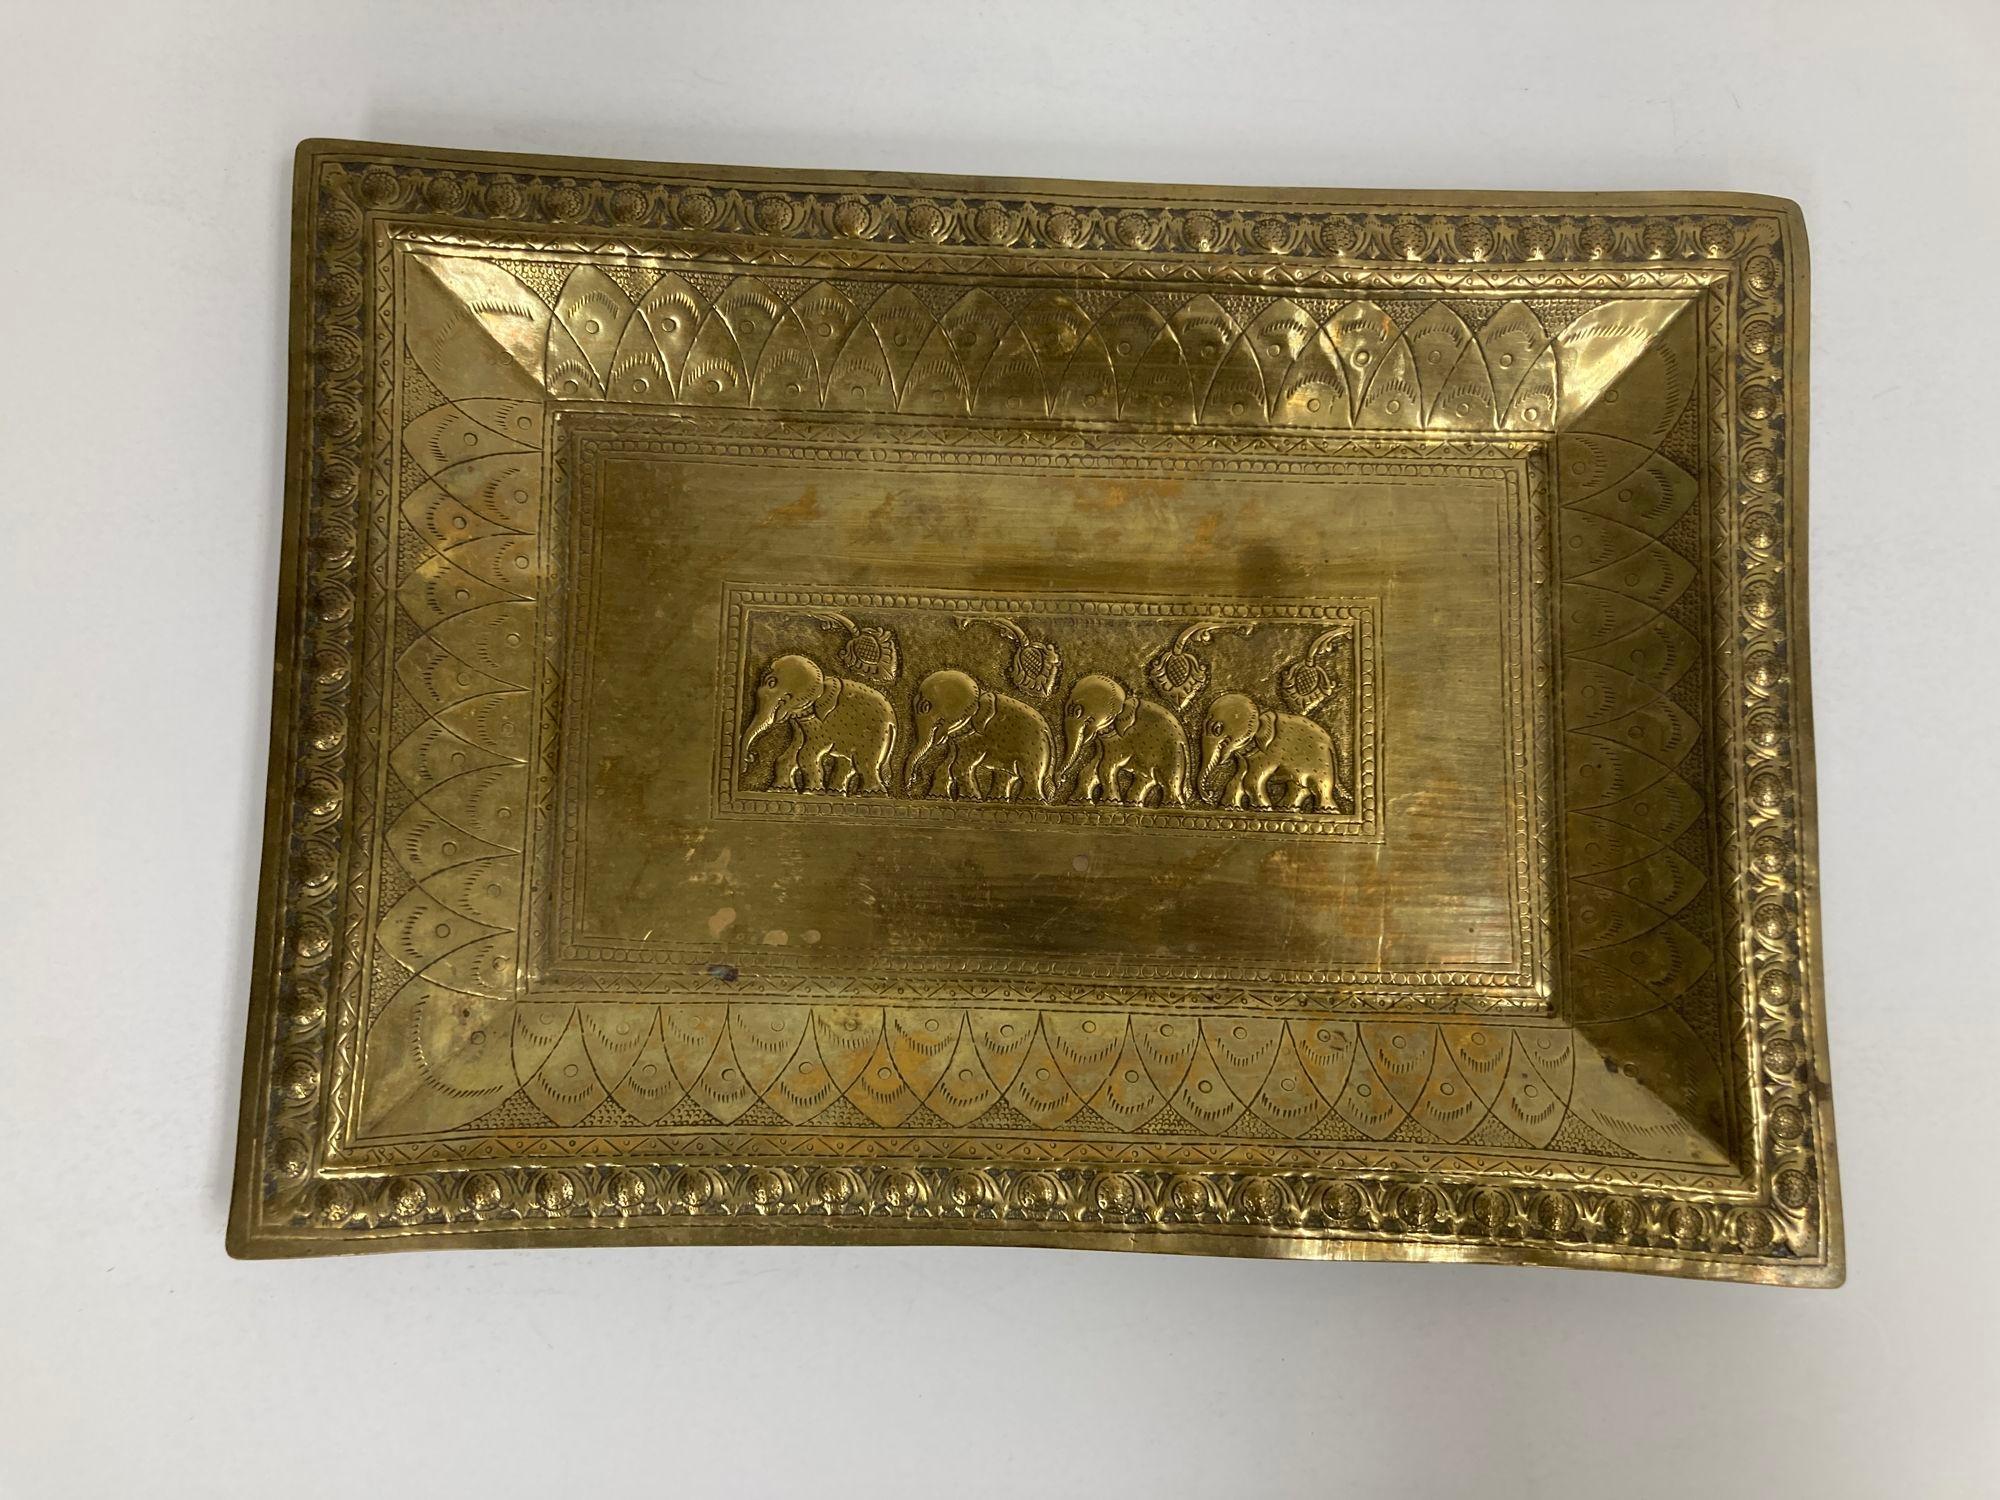 Vintage Mughal Indian brass repousee with baby elephants motif engraved brass charger serving tray.
Vintage Serving metal rectangular tray, platter engraved and finely decorated with elephants and repousse with a wide border in geometric embossed